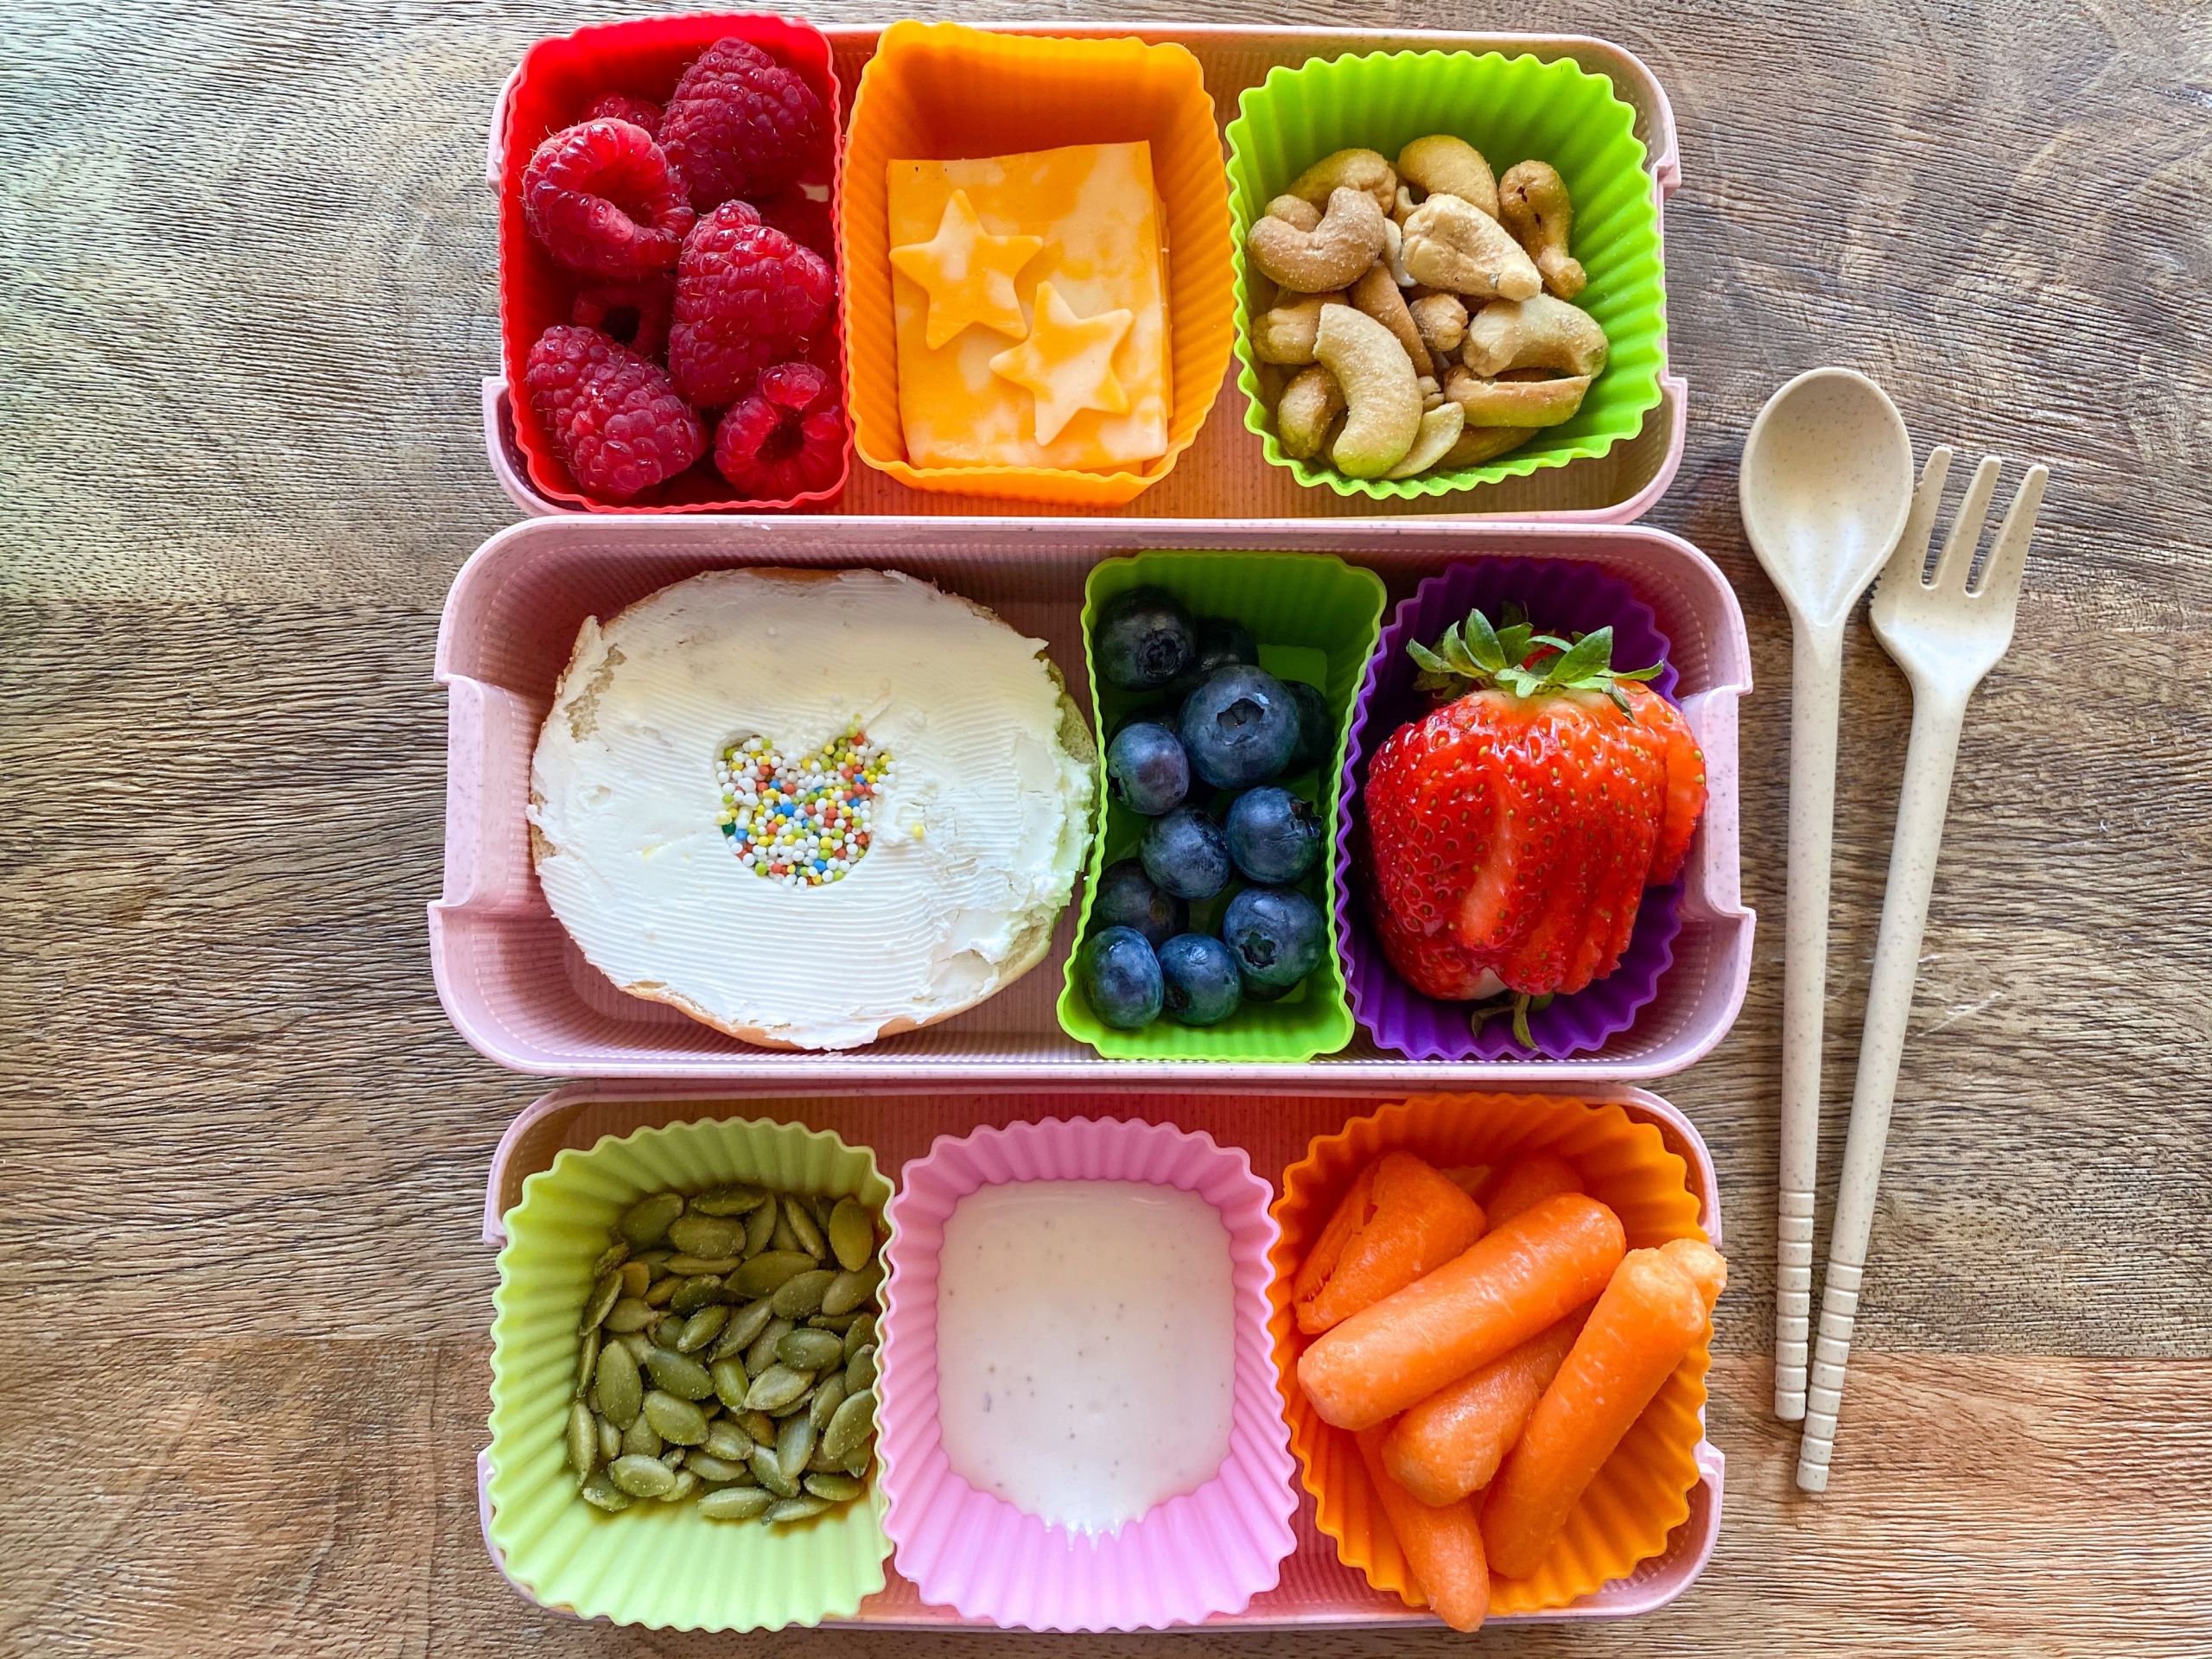 Healthy Lunches for Kids Awesome Healthy Kids School Lunches • Happy Family Blog